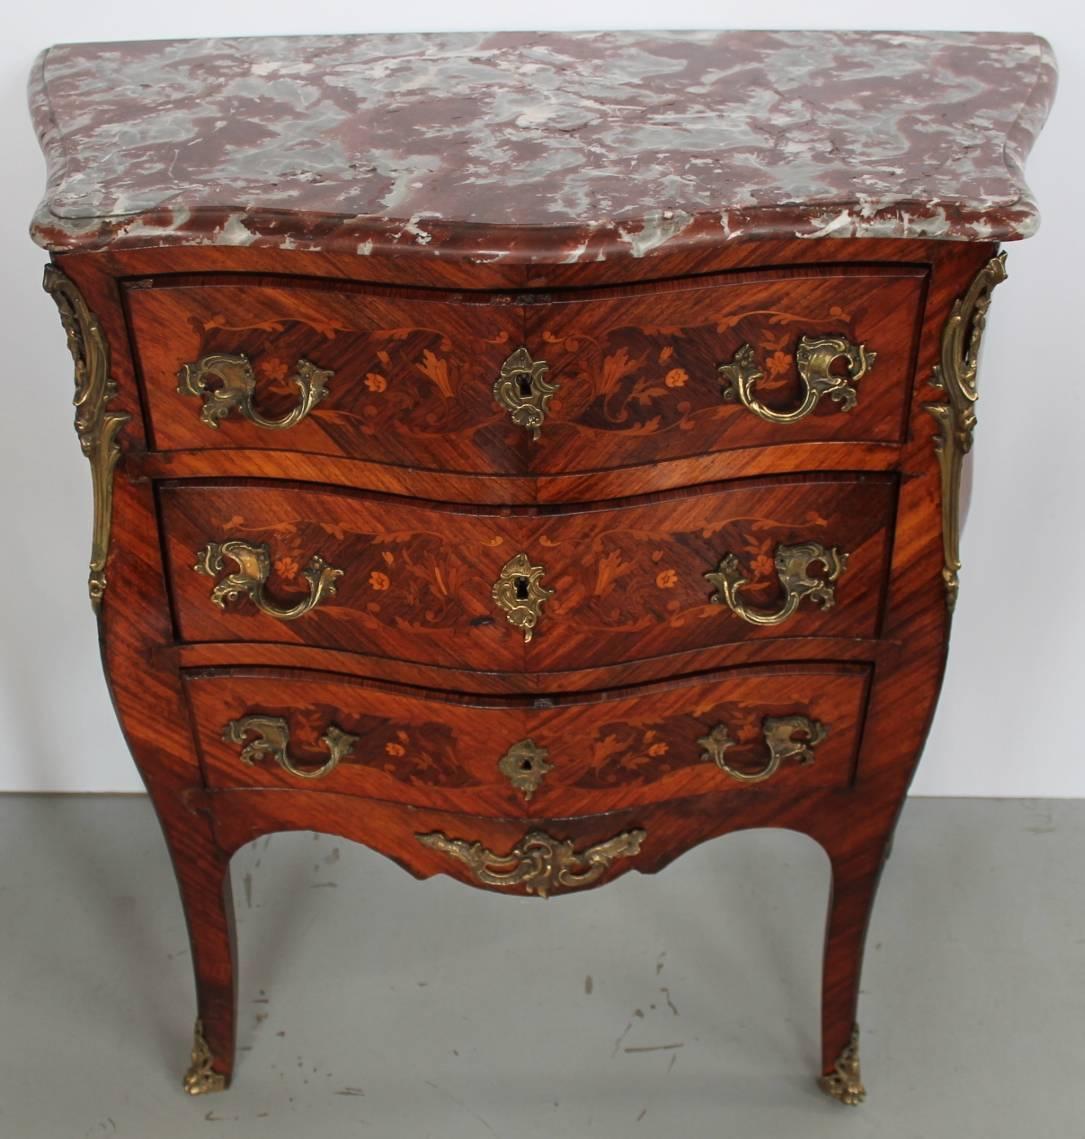 Bronze Louis XV Style Marquetry Inlaid Petite Commode, Late 19th-Early 20th Century For Sale